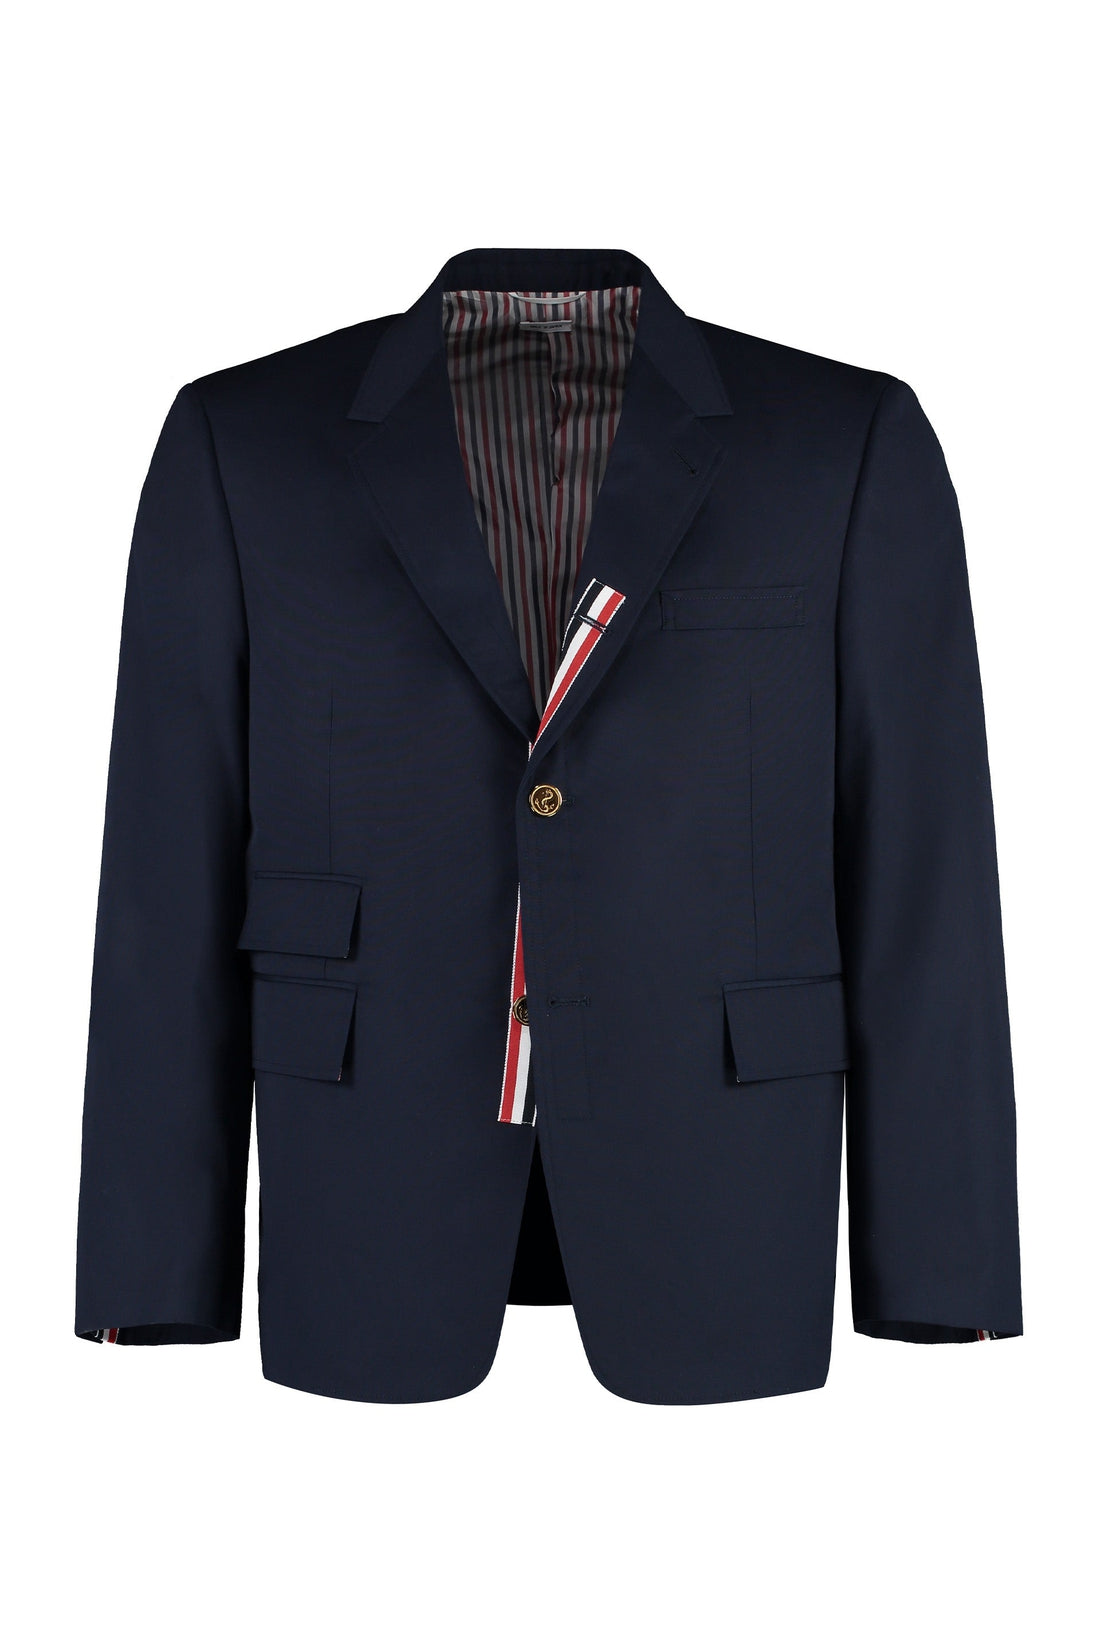 Thom Browne-OUTLET-SALE-Single-breasted two-button blazer-ARCHIVIST